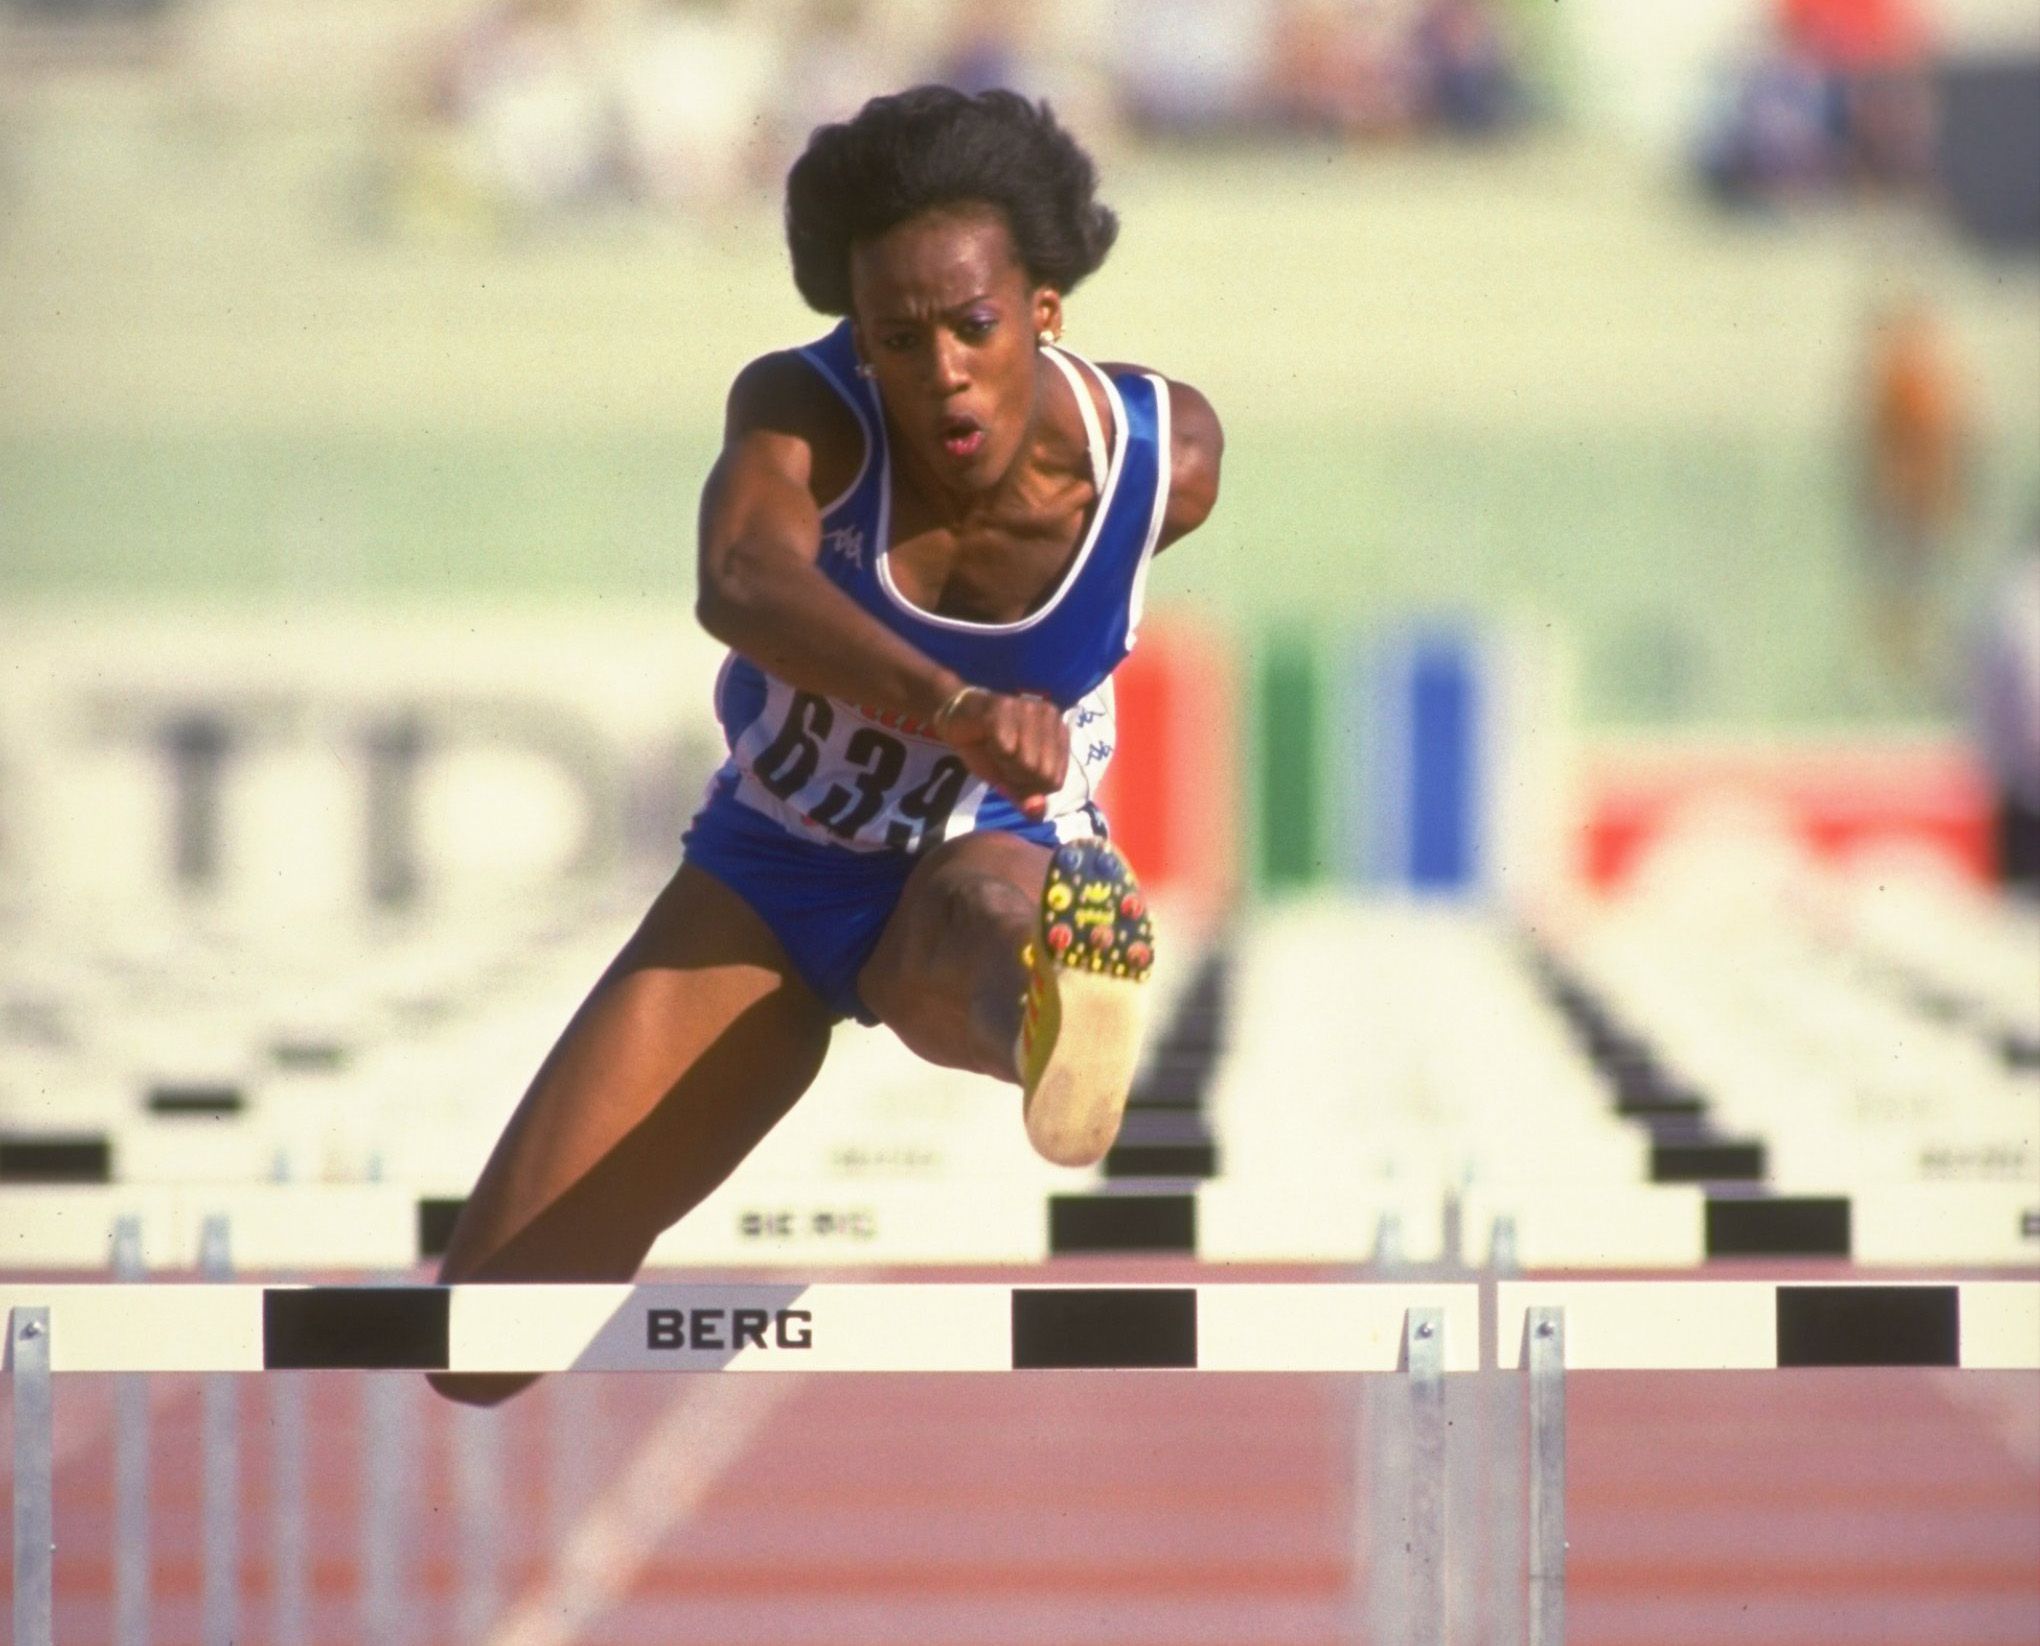 Jackie Joyner-Kersee in action at the 1987 World Championships